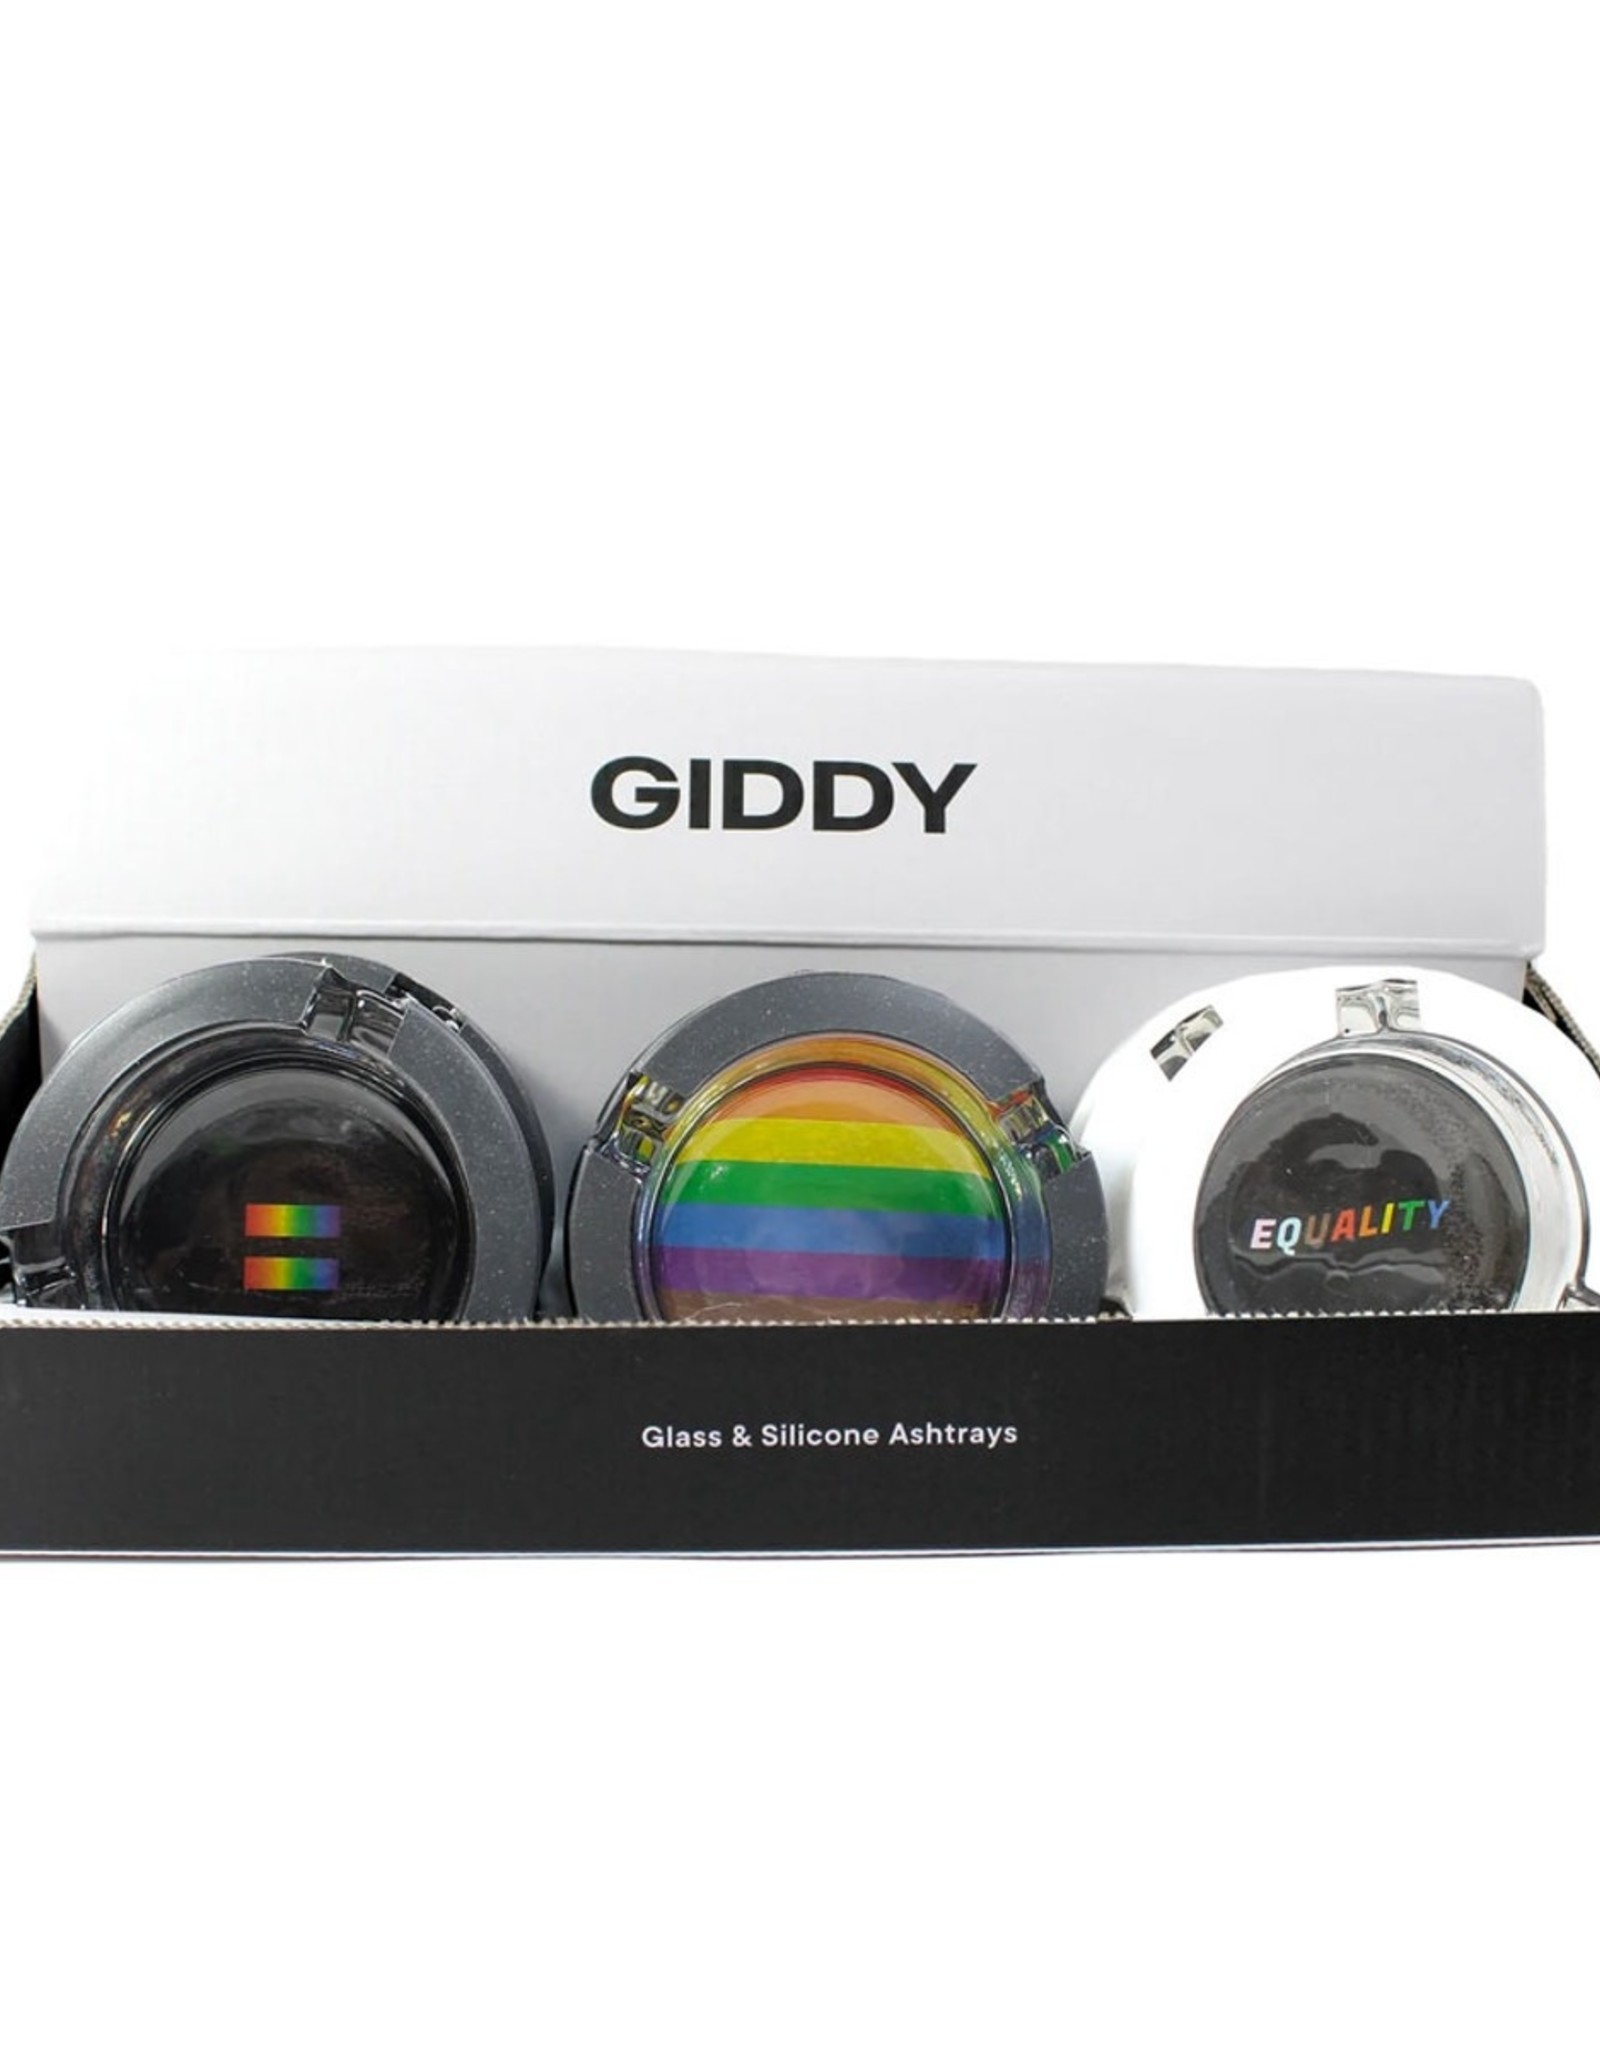 Giddy 3" Equality Glass Ashtray with Silicone Cover